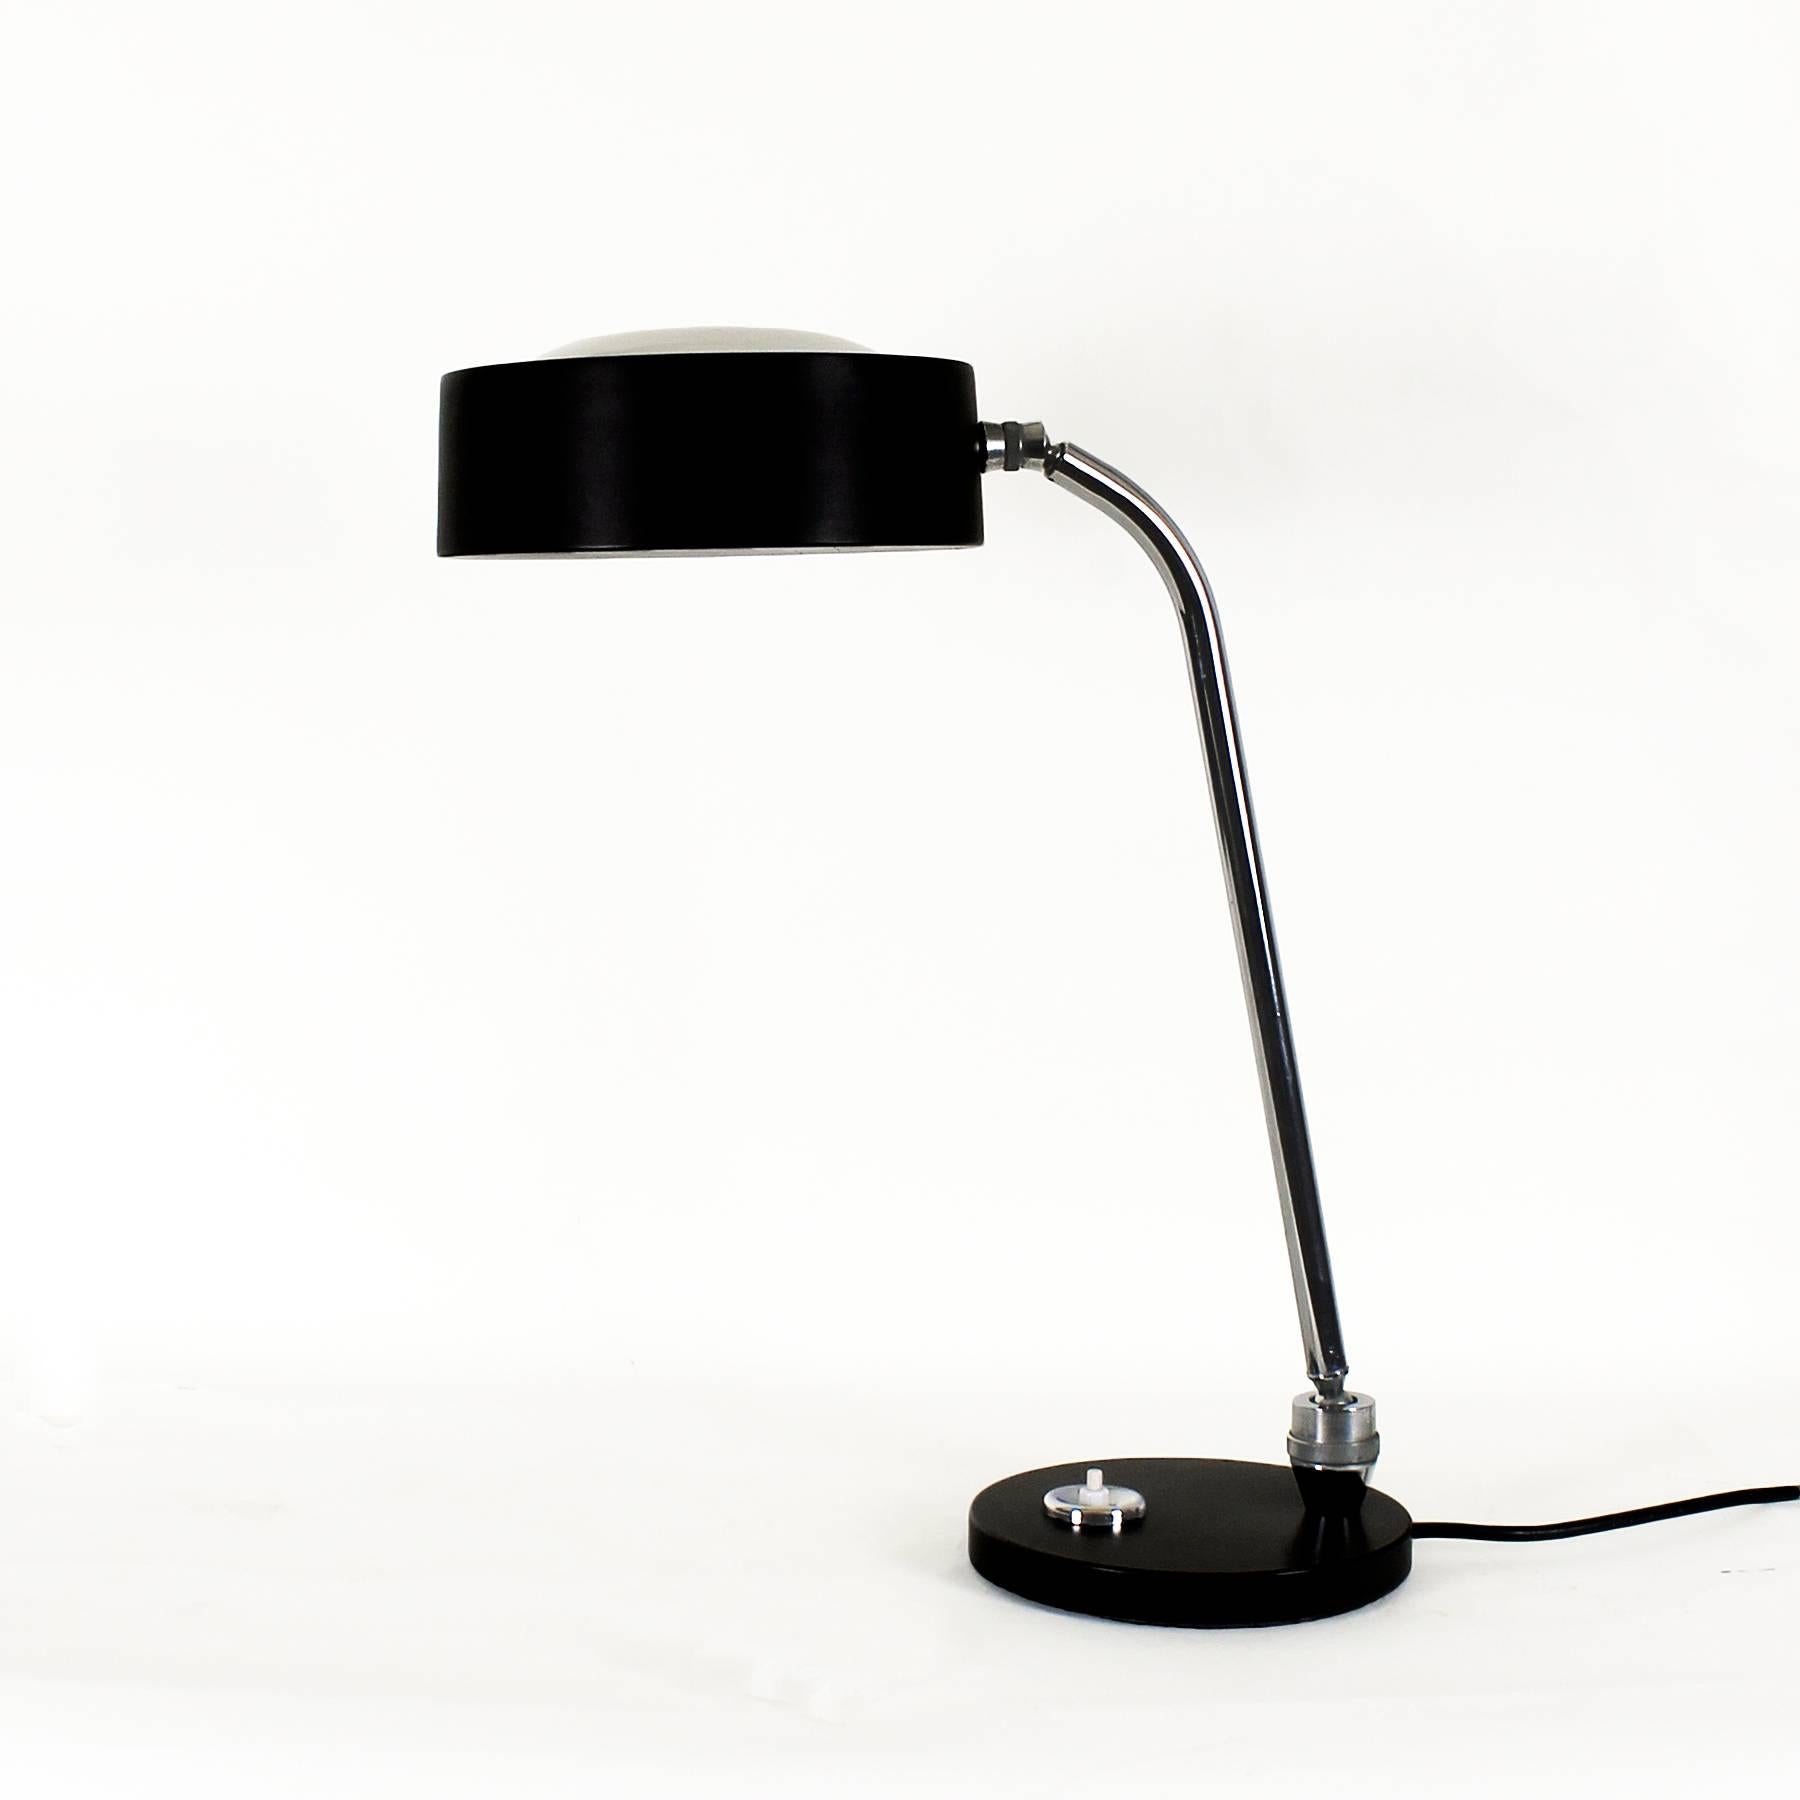 Pair of desk lamps, articulated by two ball joints, black and white lacquered steel base and lampshade, nickel-plated brass stand and joints, original switch, bayonet bulbs.
Design: André Mounique
Maker: Maison Jumo

France, circa 1960.